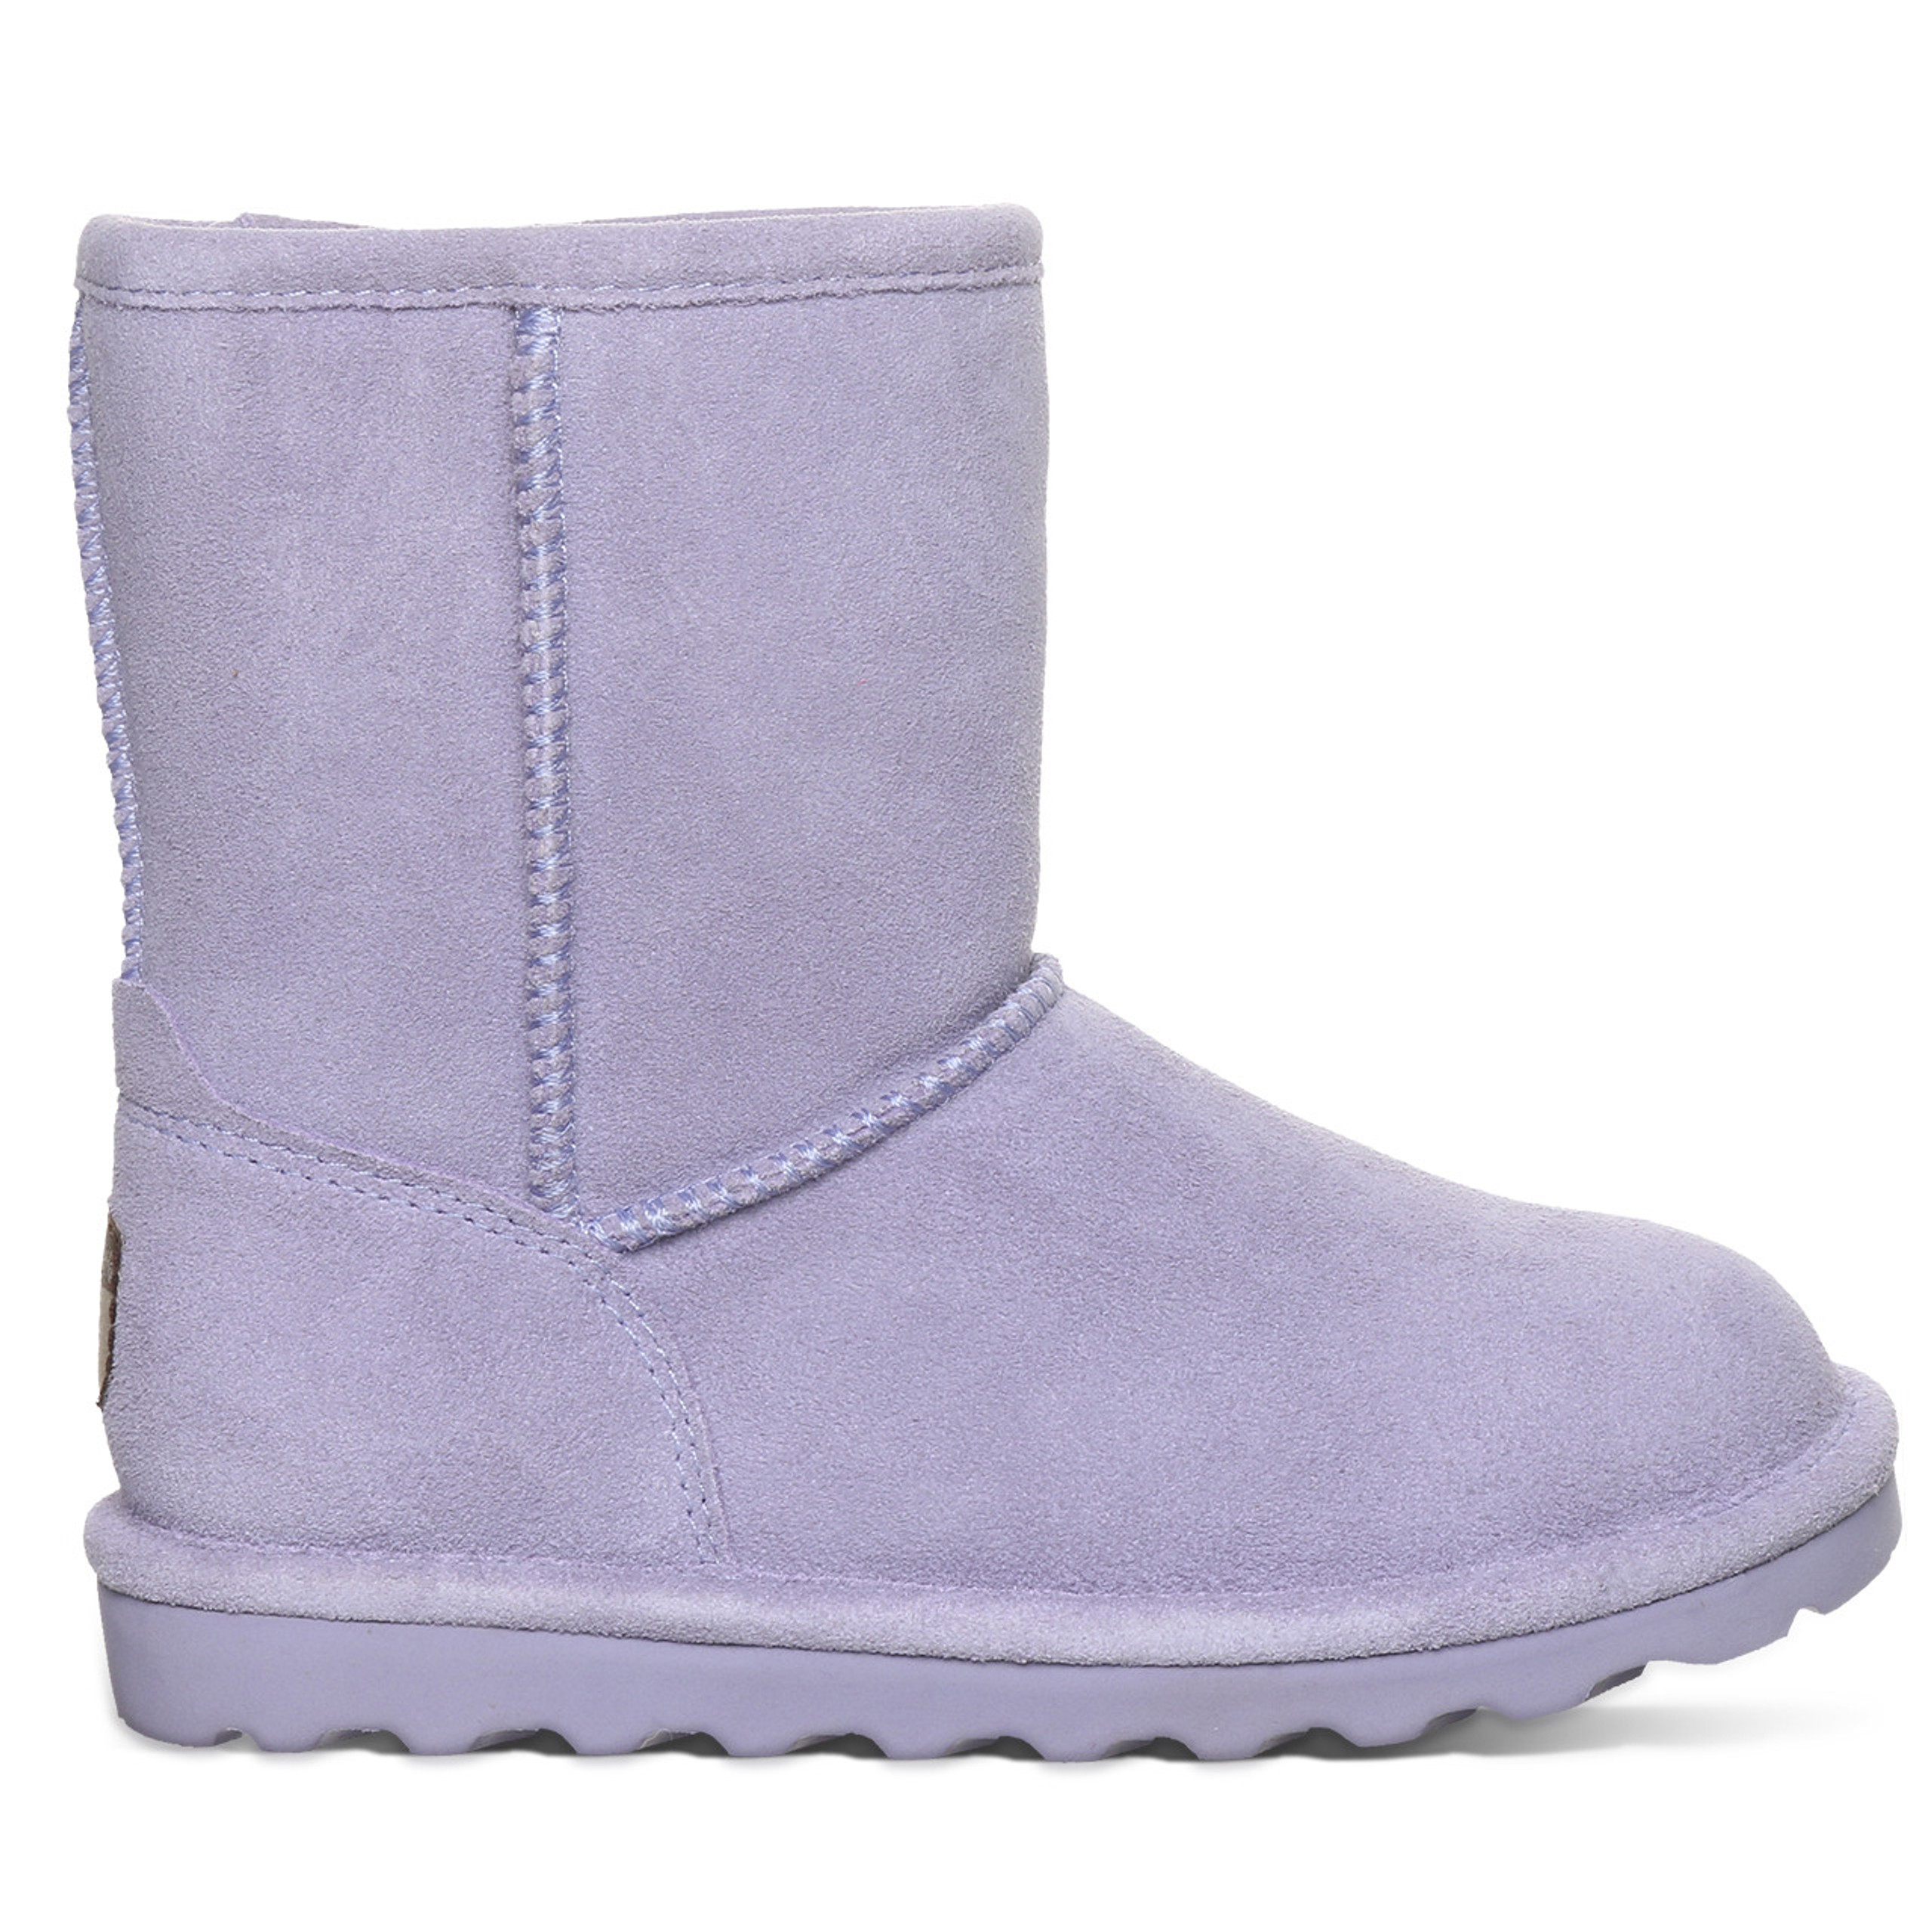 BEARPAW ® Official Site | Kids Boots, Slippers & Shoes